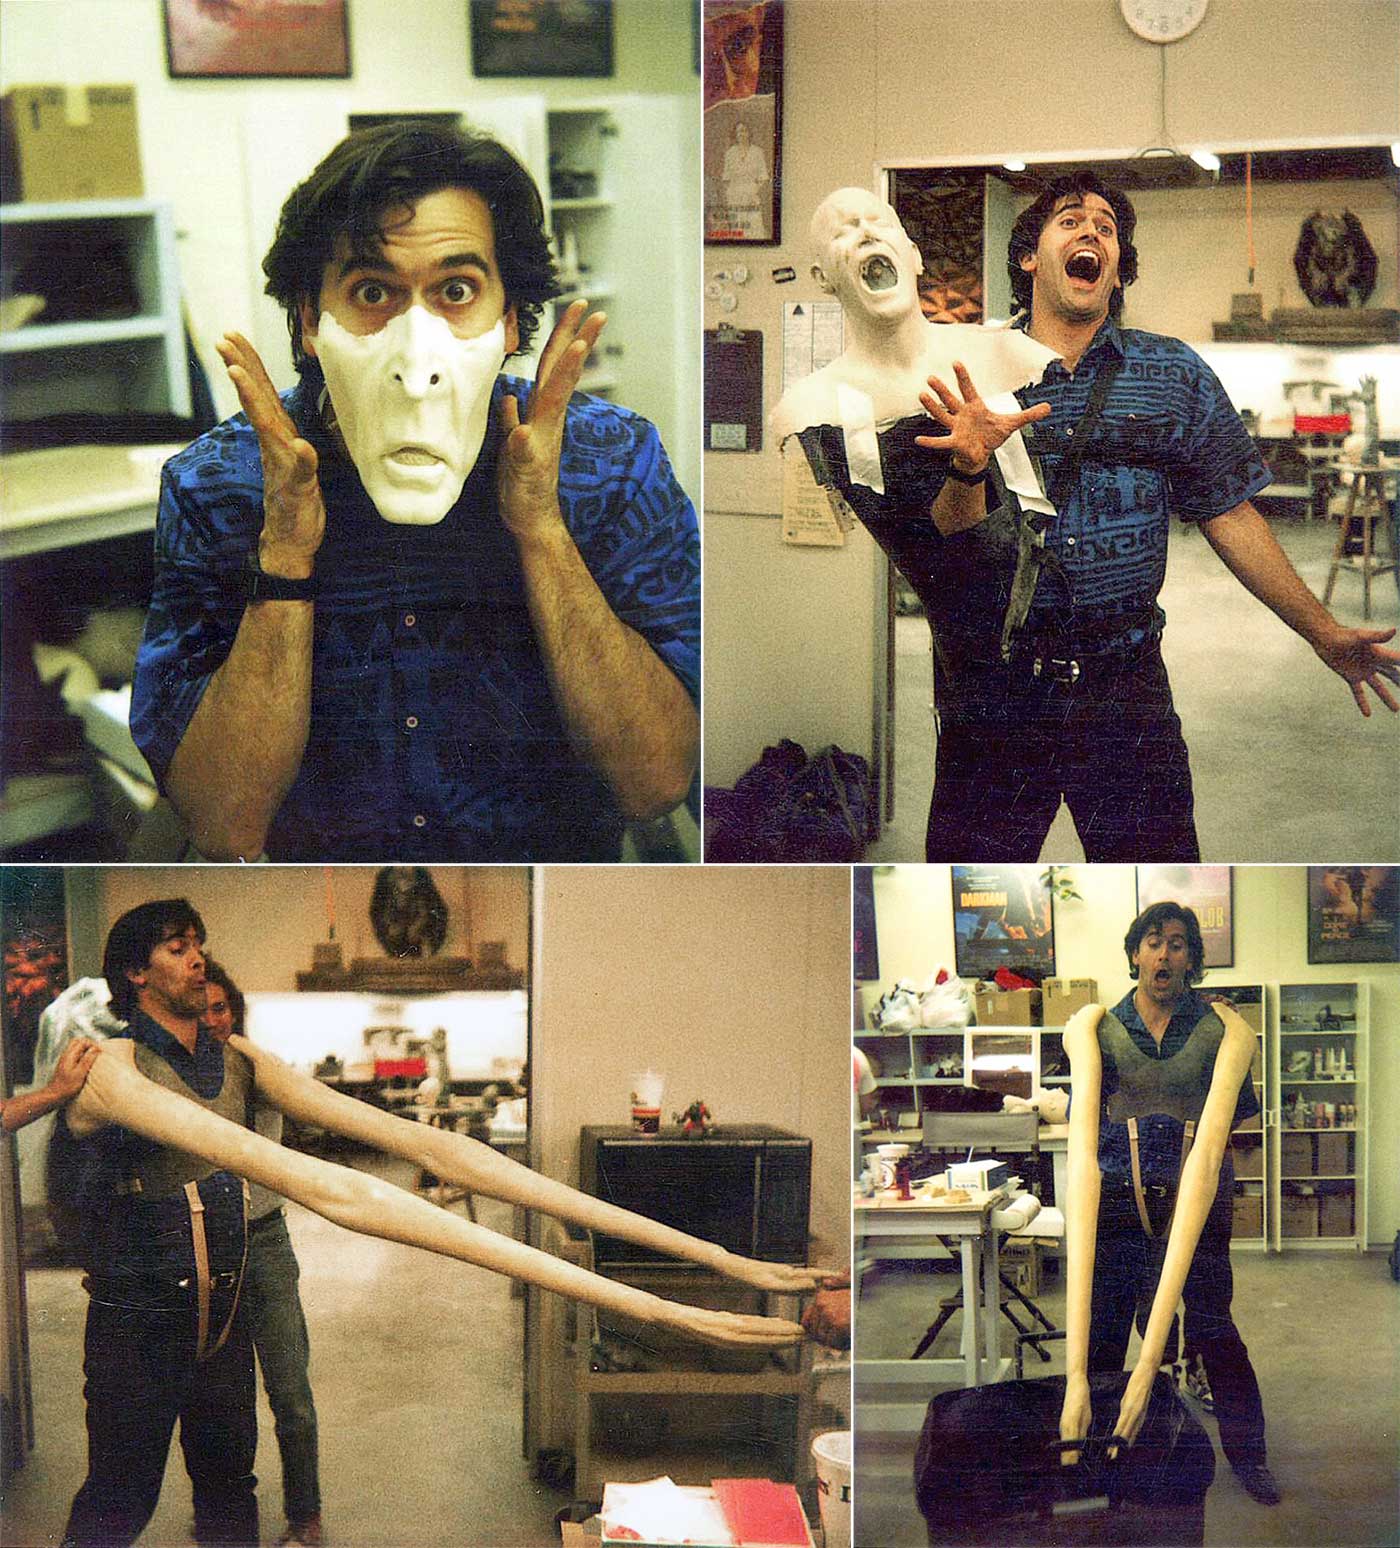 Prop room pics from the movie Army Of Darkness